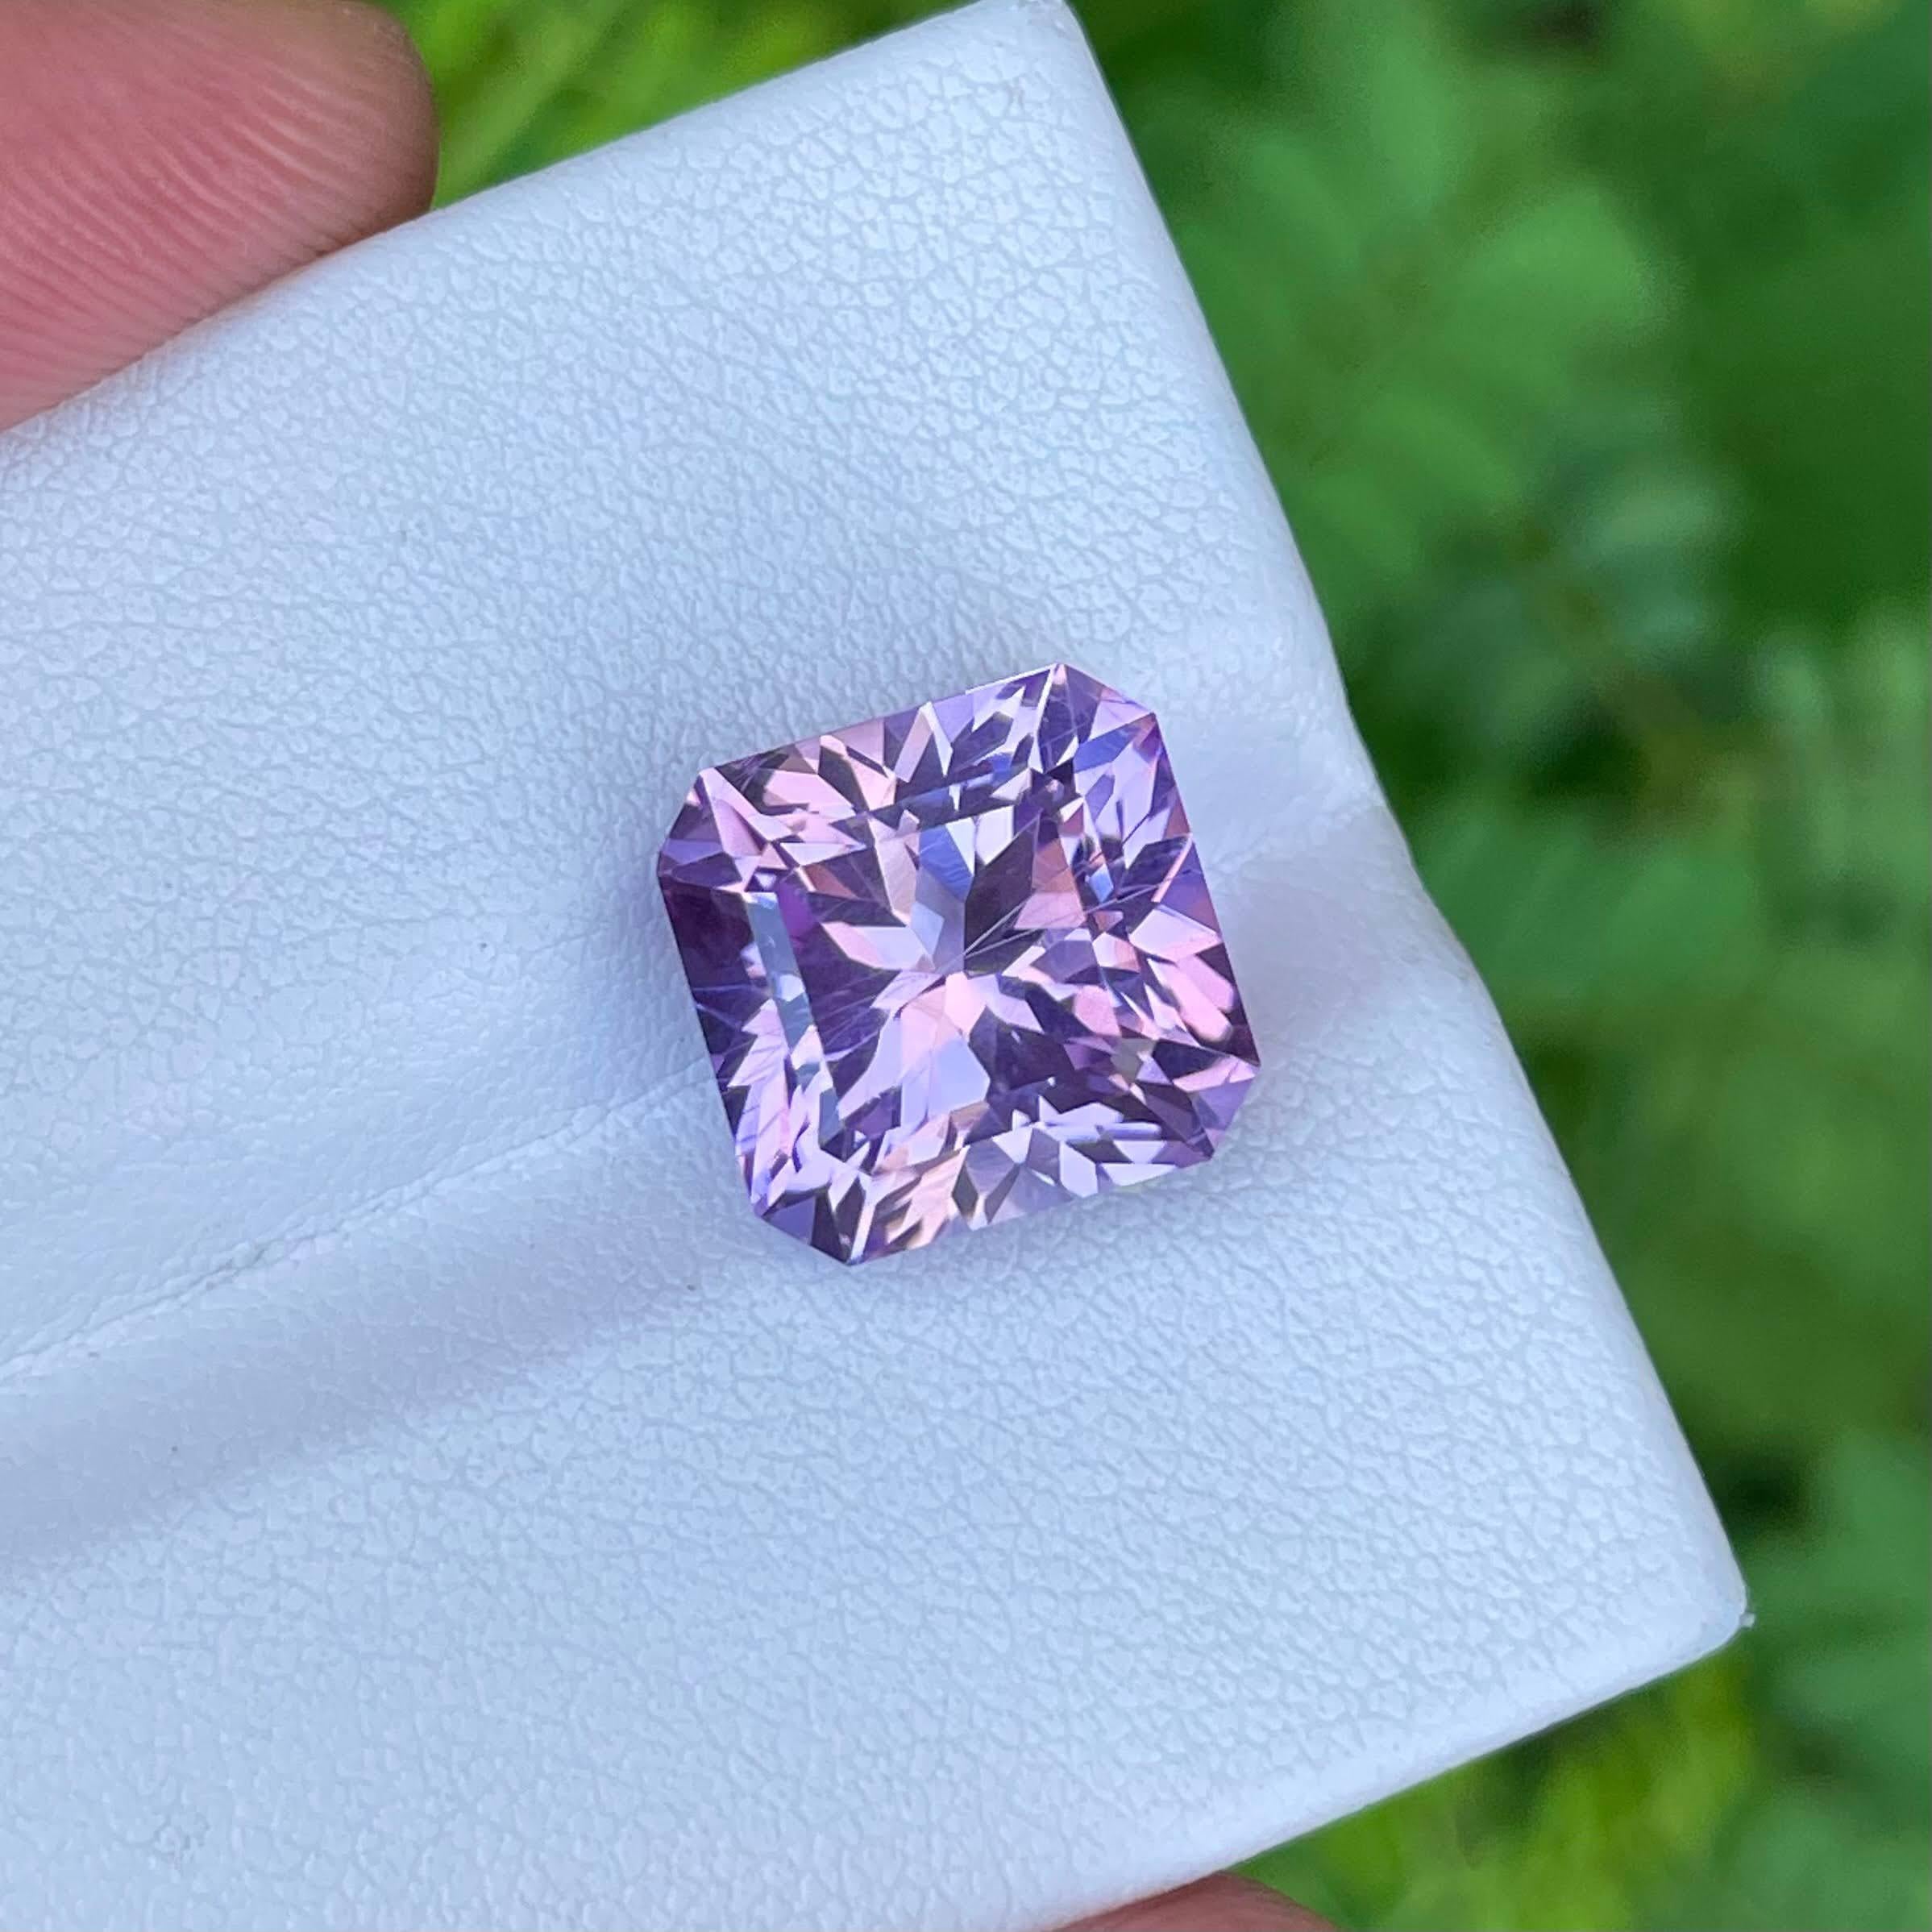 9.30 carats 
11.62x11.42x8.95 mm
Clarity VVS
Treatment None
Origin Nigeria
Shape Octagon
Cut Mix Radiant




In a distant corner of Nigeria, a captivating purple kunzite stone, weighing an impressive 9.30 carats, emerges as a radiant testament to